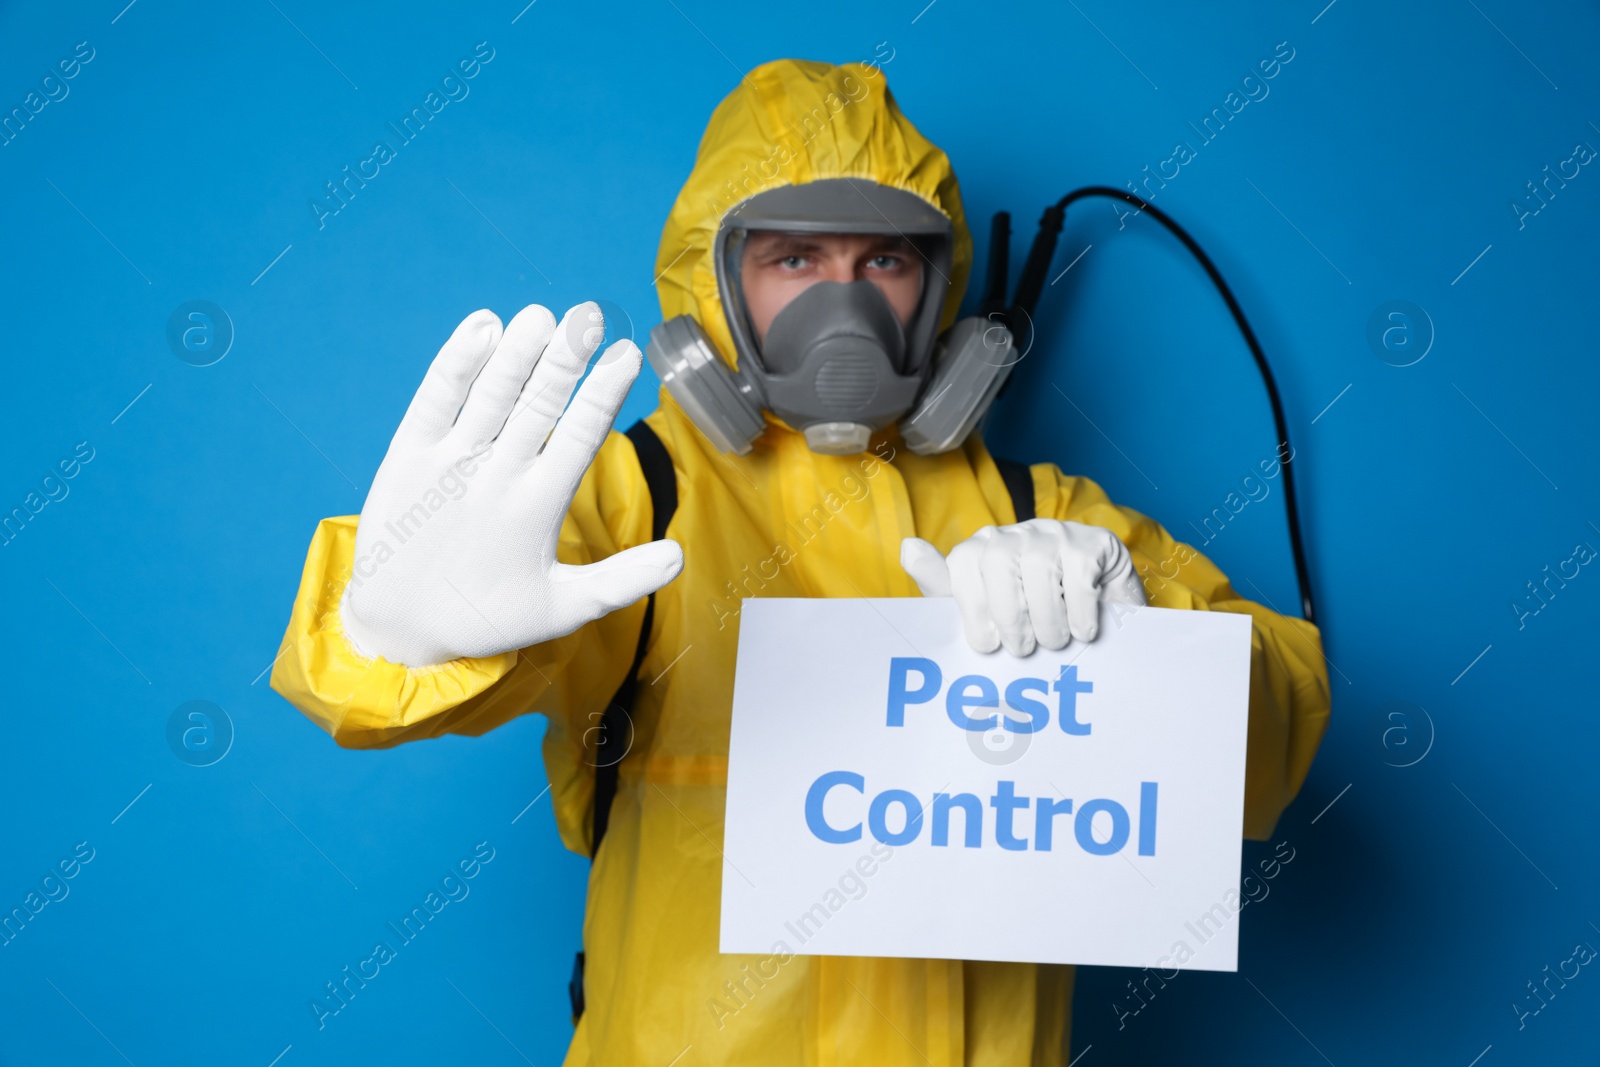 Photo of Man wearing protective suit with insecticide sprayer holding sign PEST CONTROL on blue background